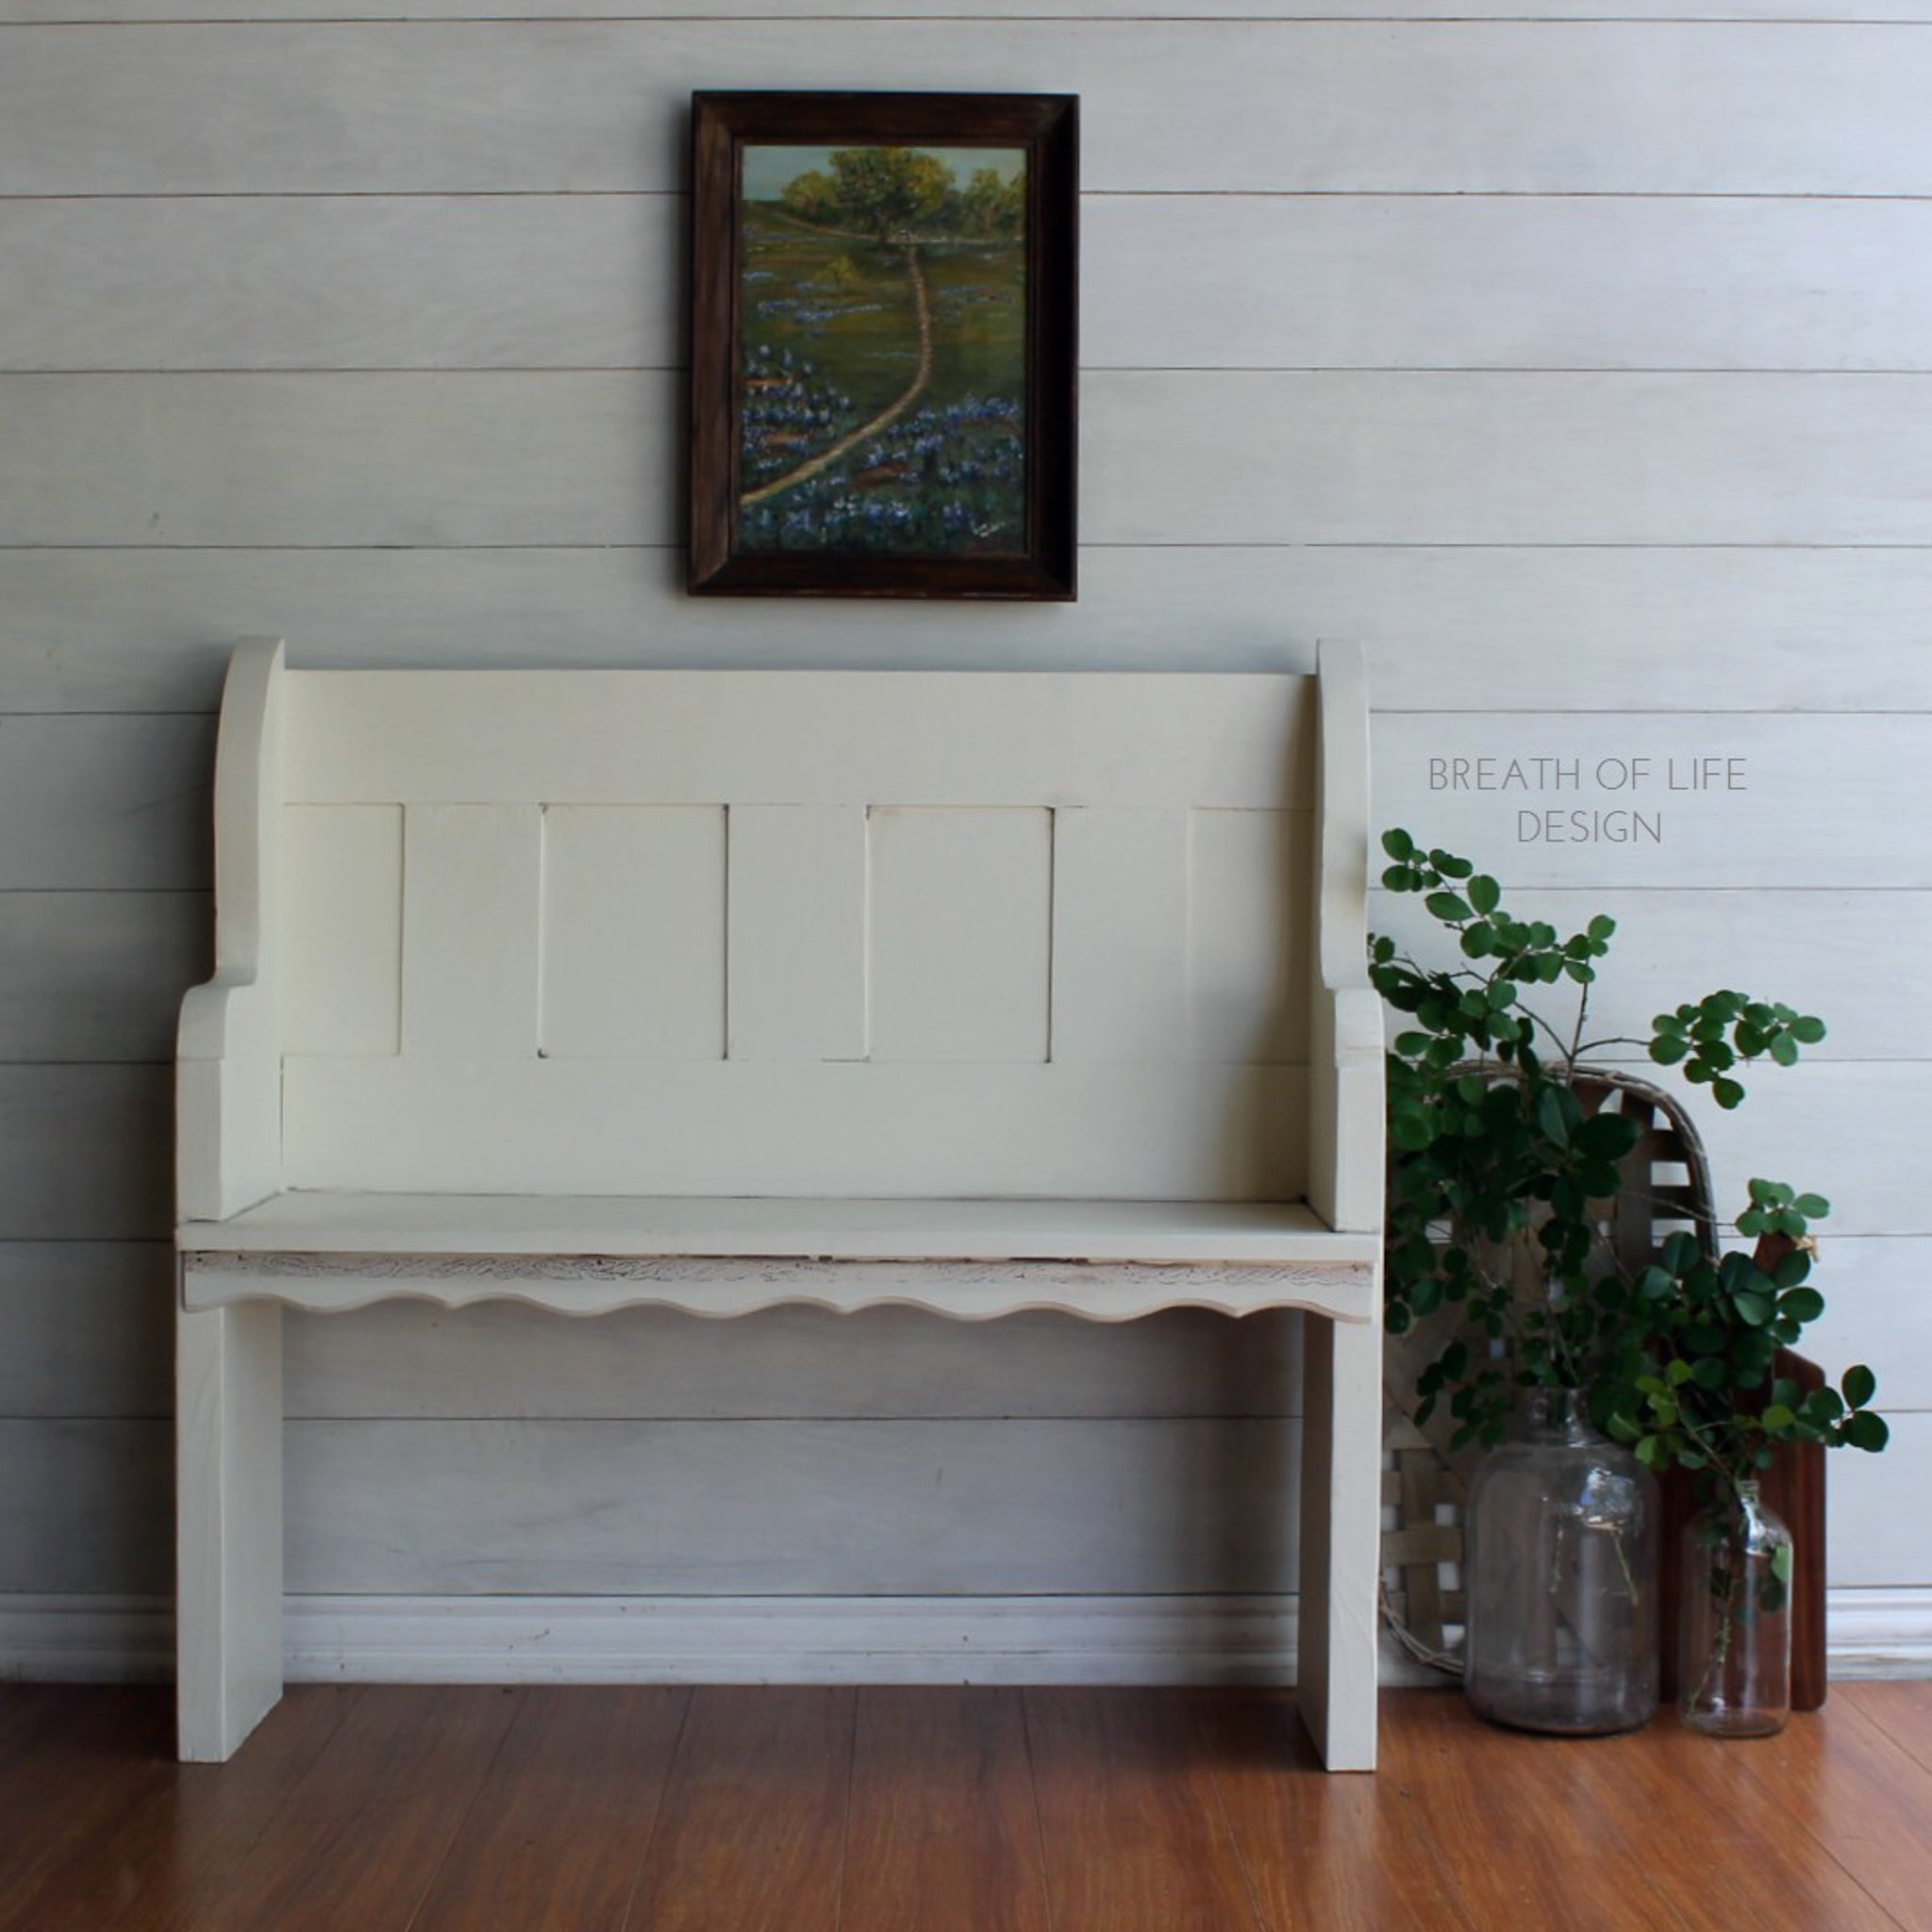 A vintage pew style bench refurbished by Breath of Life Design is painted in Dixie Belle's Buttercream chalk mineral paint.